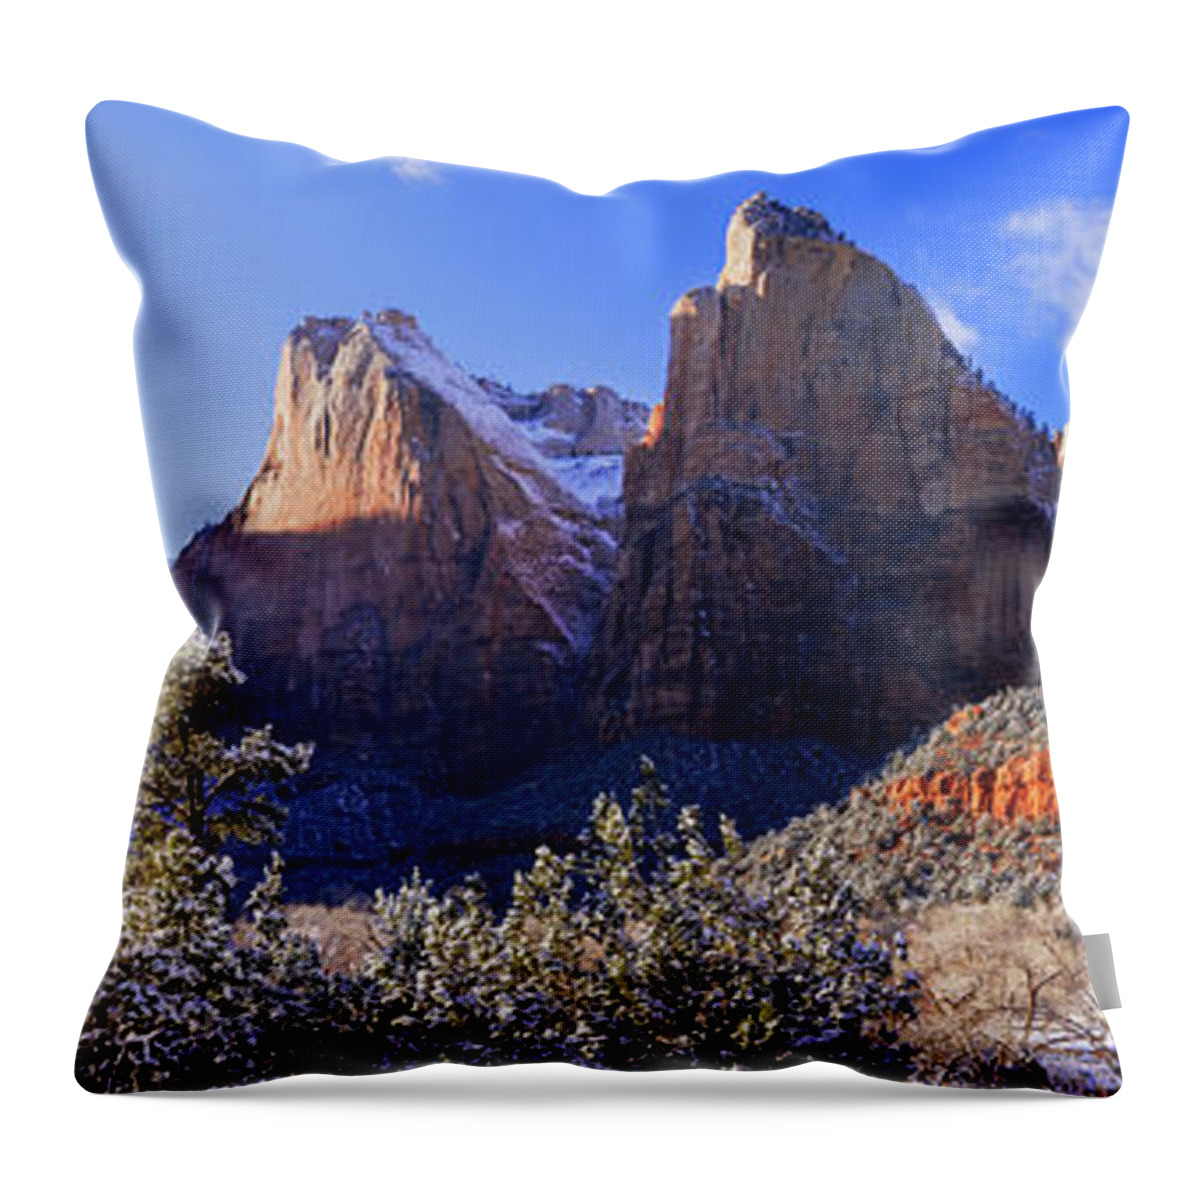 Patriarchs Throw Pillow featuring the photograph Patriarchs by Chad Dutson